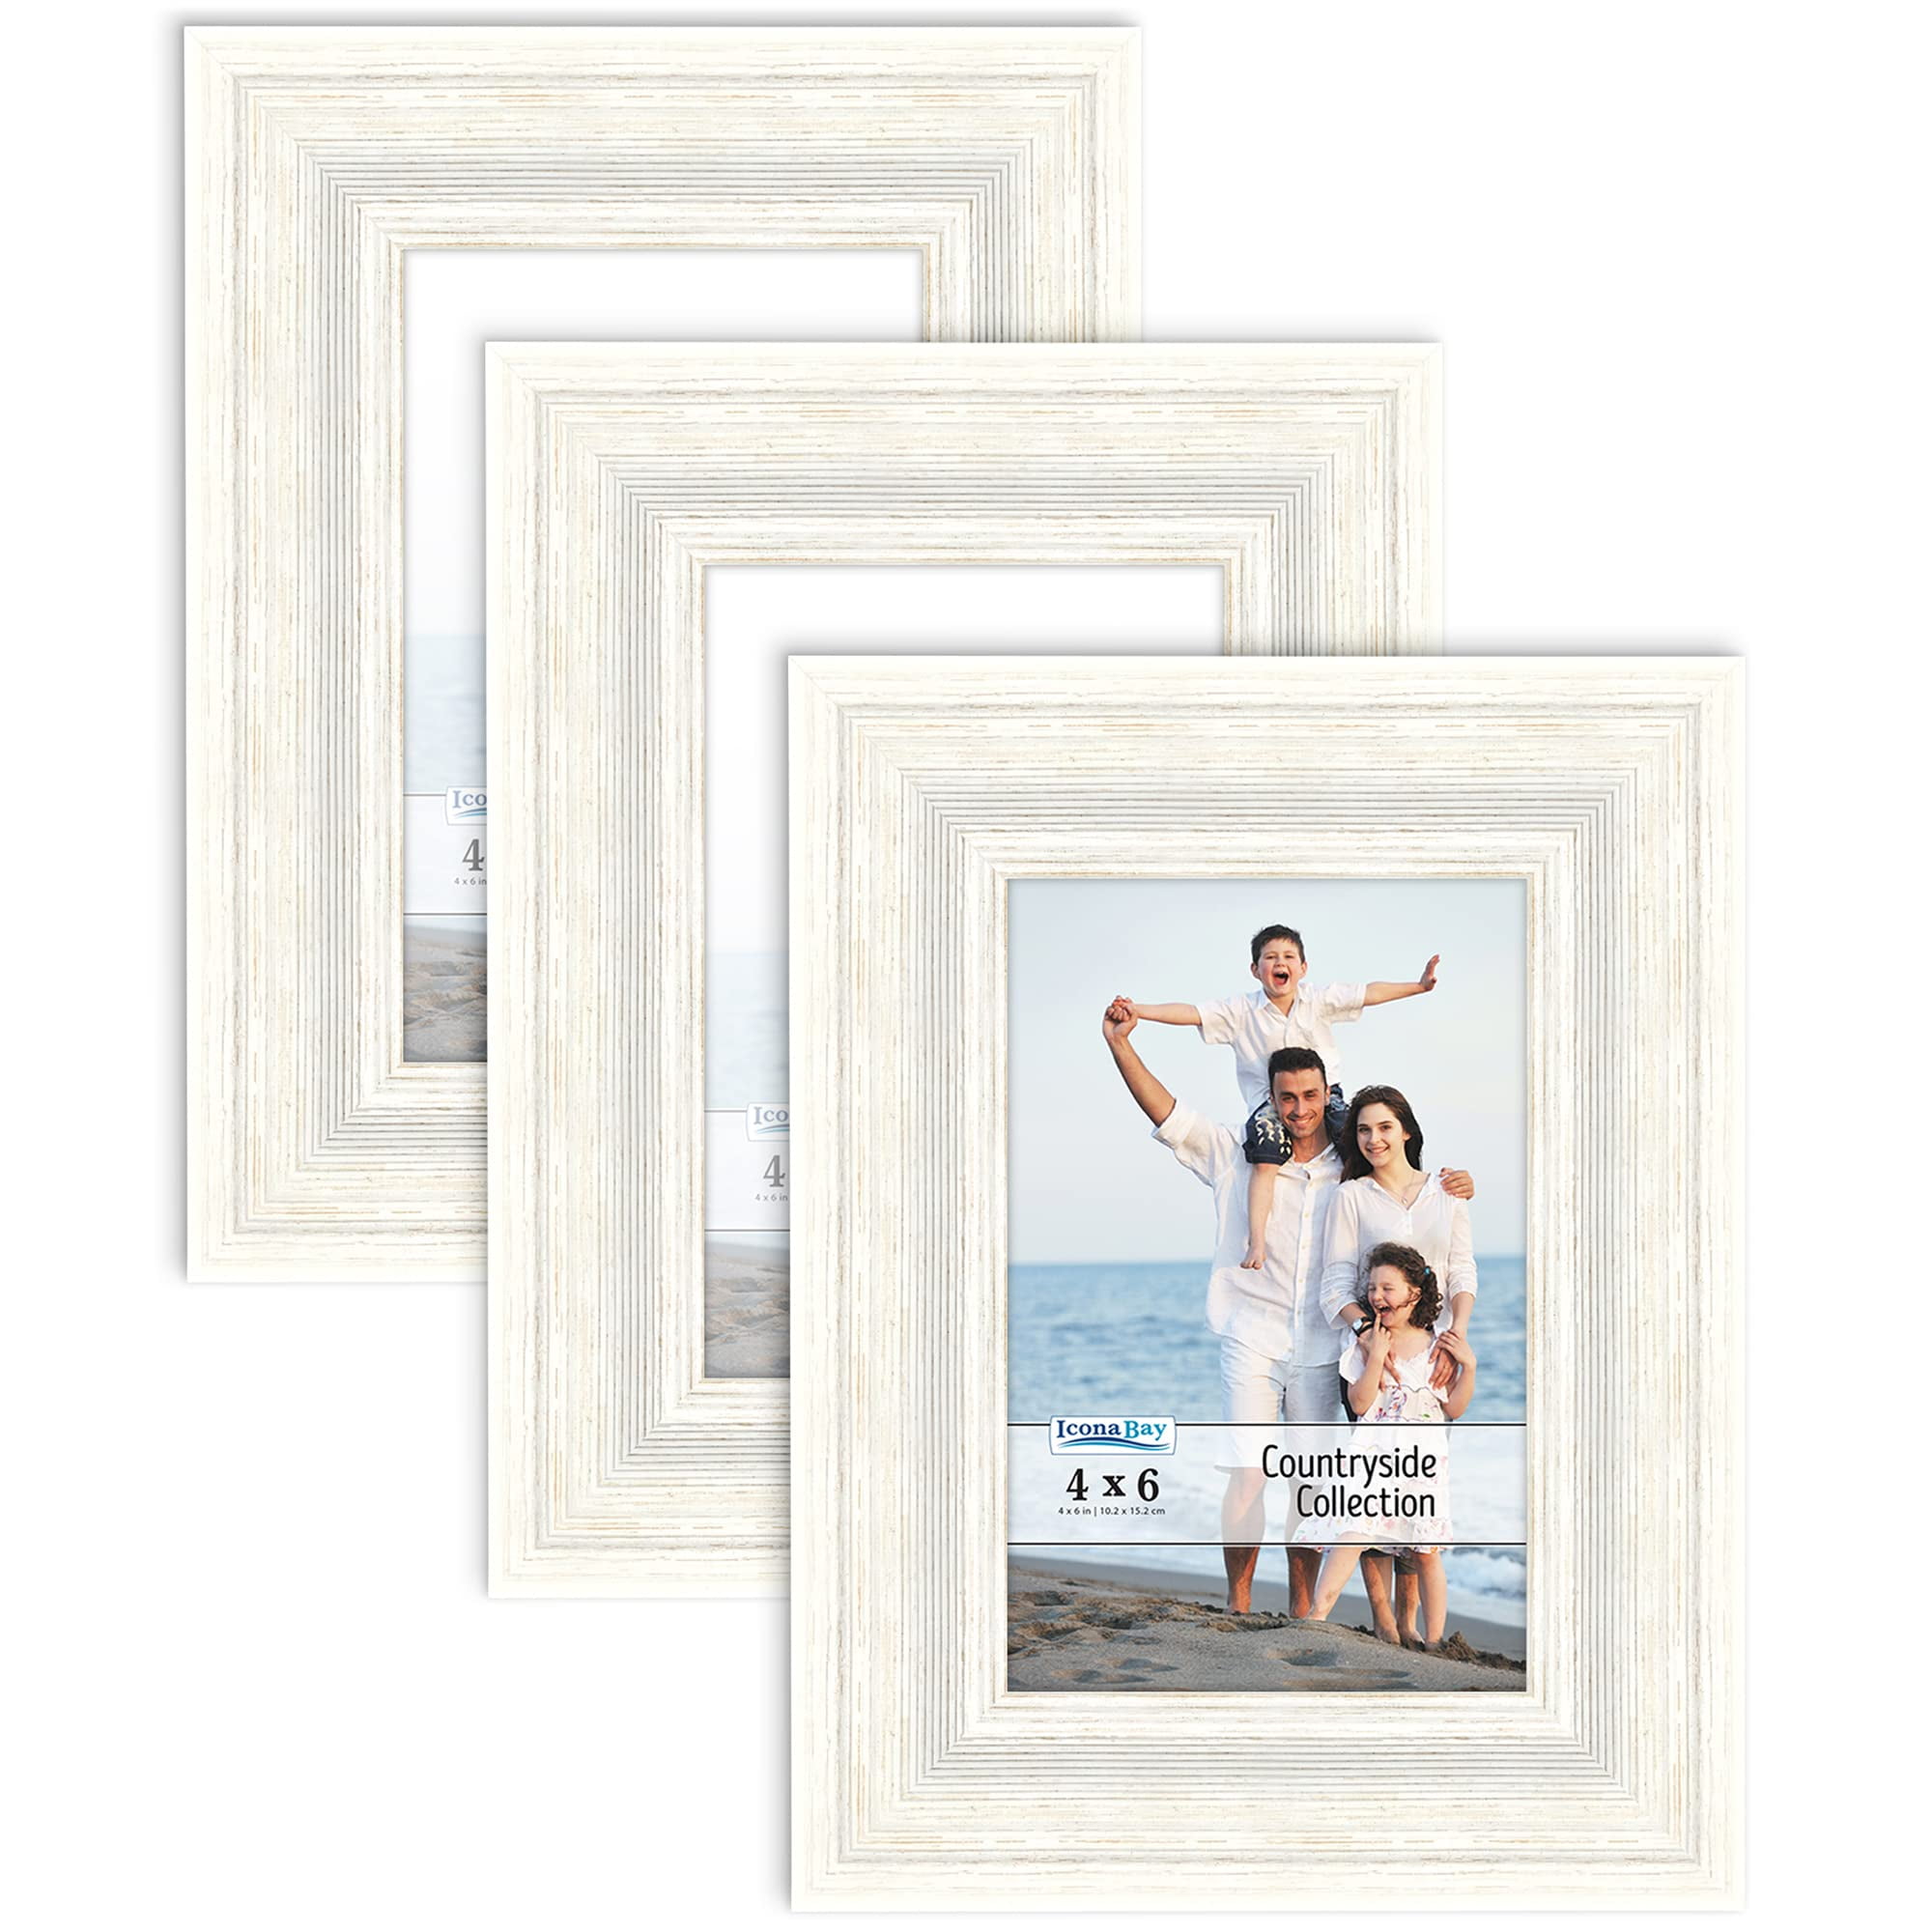 Pack of 4 Cream/Ivory picture/photo mounts size 10x8 for 6x4 inches 